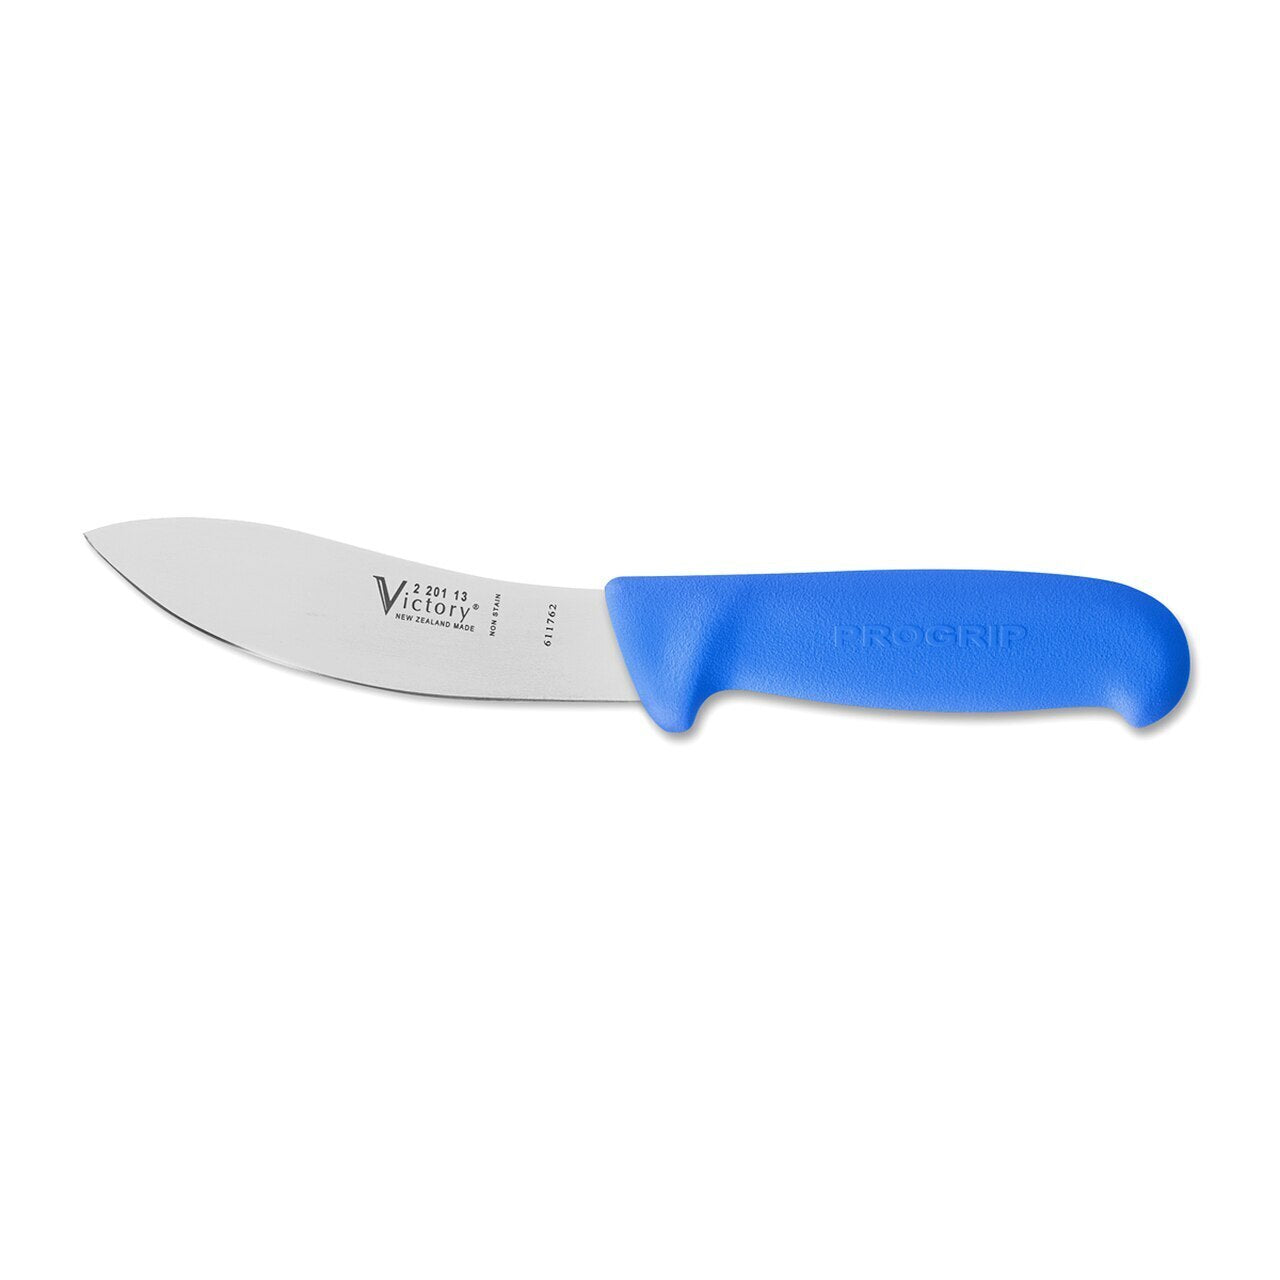 Victory Sheep Skinner Knife with Progrip Blue 13cm Hang Sell -  - Mansfield Hunting & Fishing - Products to prepare for Corona Virus